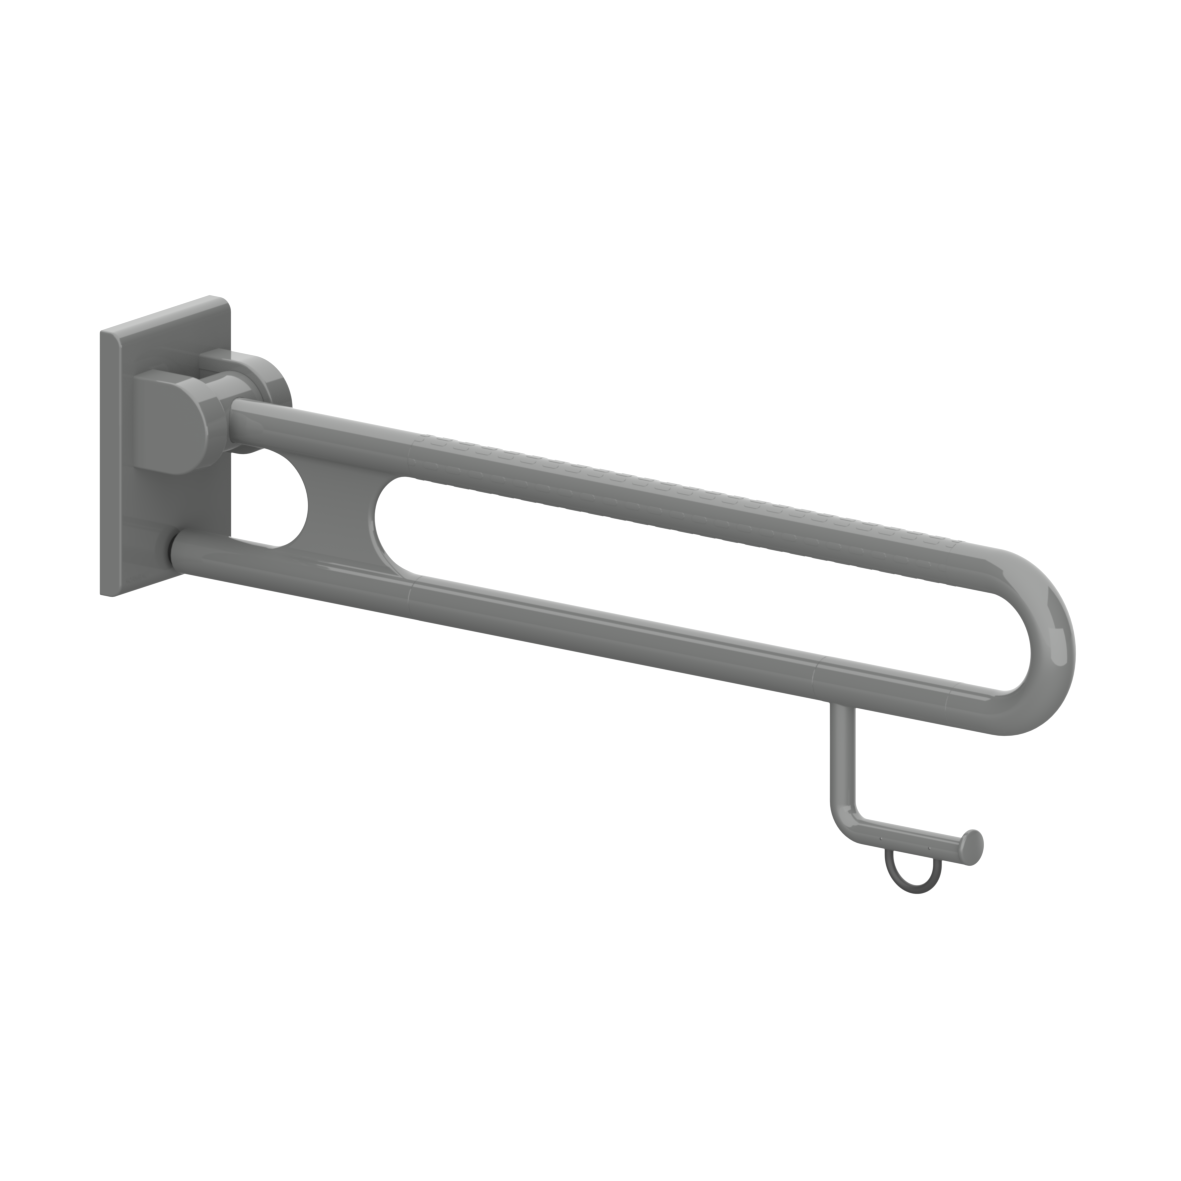 Nylon Care 400 Lift-up support rail, with Toilet roll holder, left and right, L = 850 mm, Dark grey